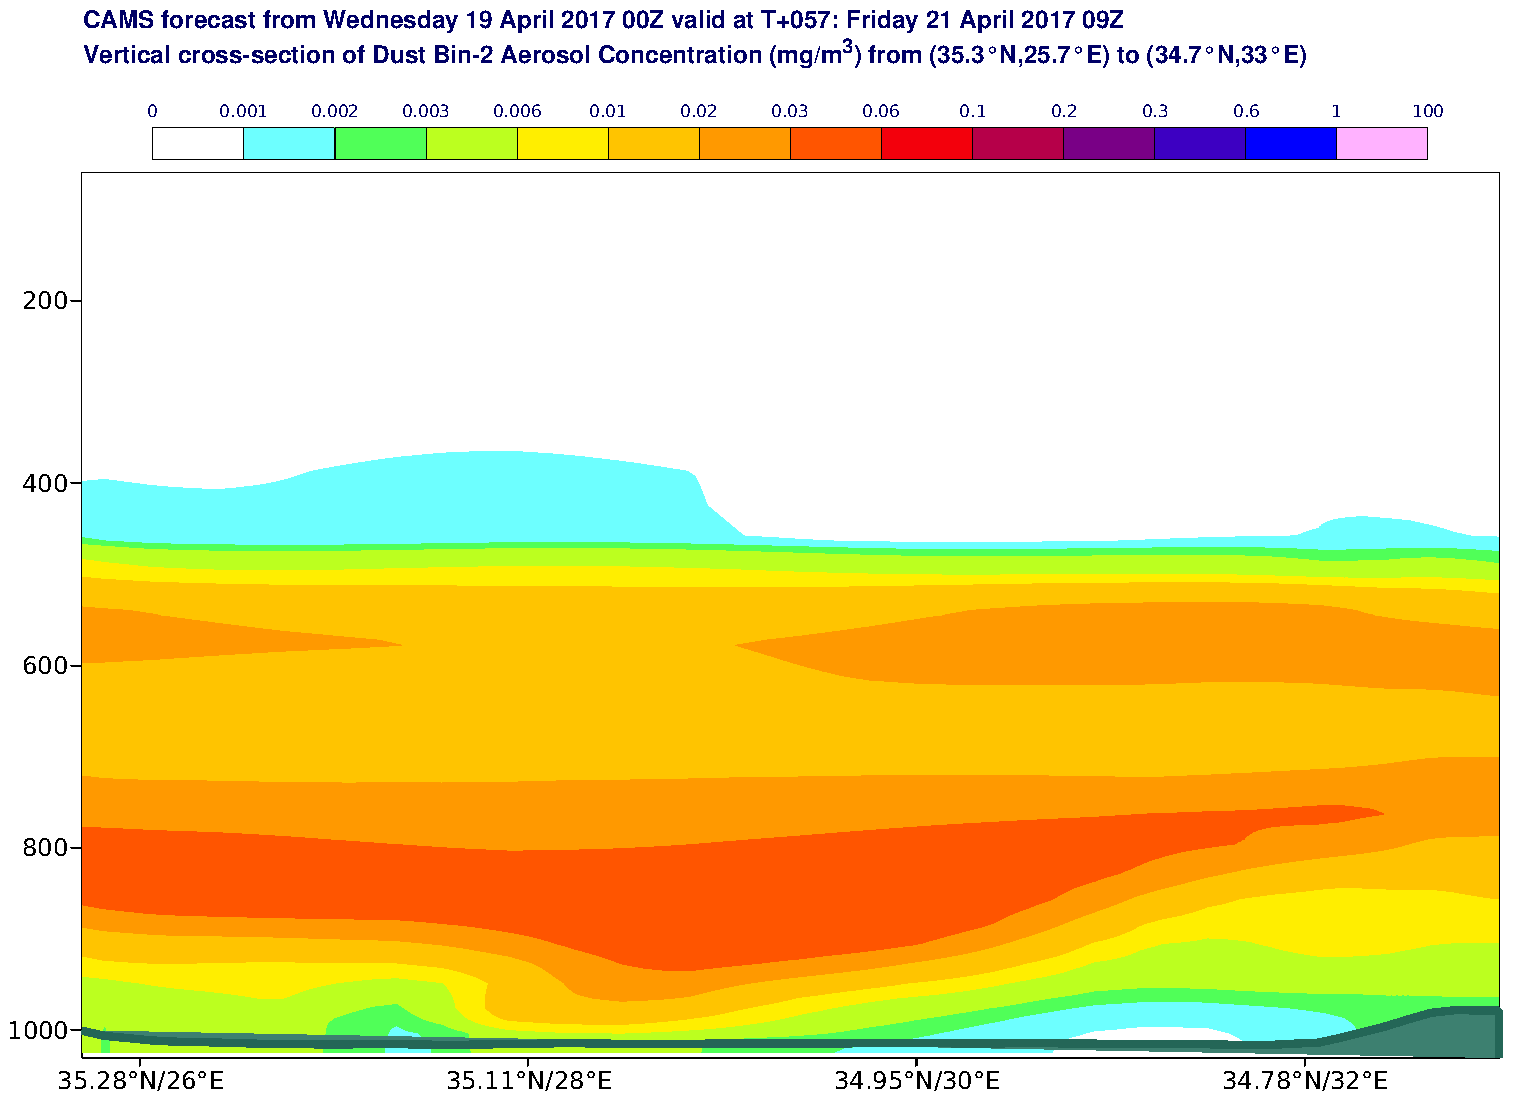 Vertical cross-section of Dust Bin-2 Aerosol Concentration (mg/m3) valid at T57 - 2017-04-21 09:00